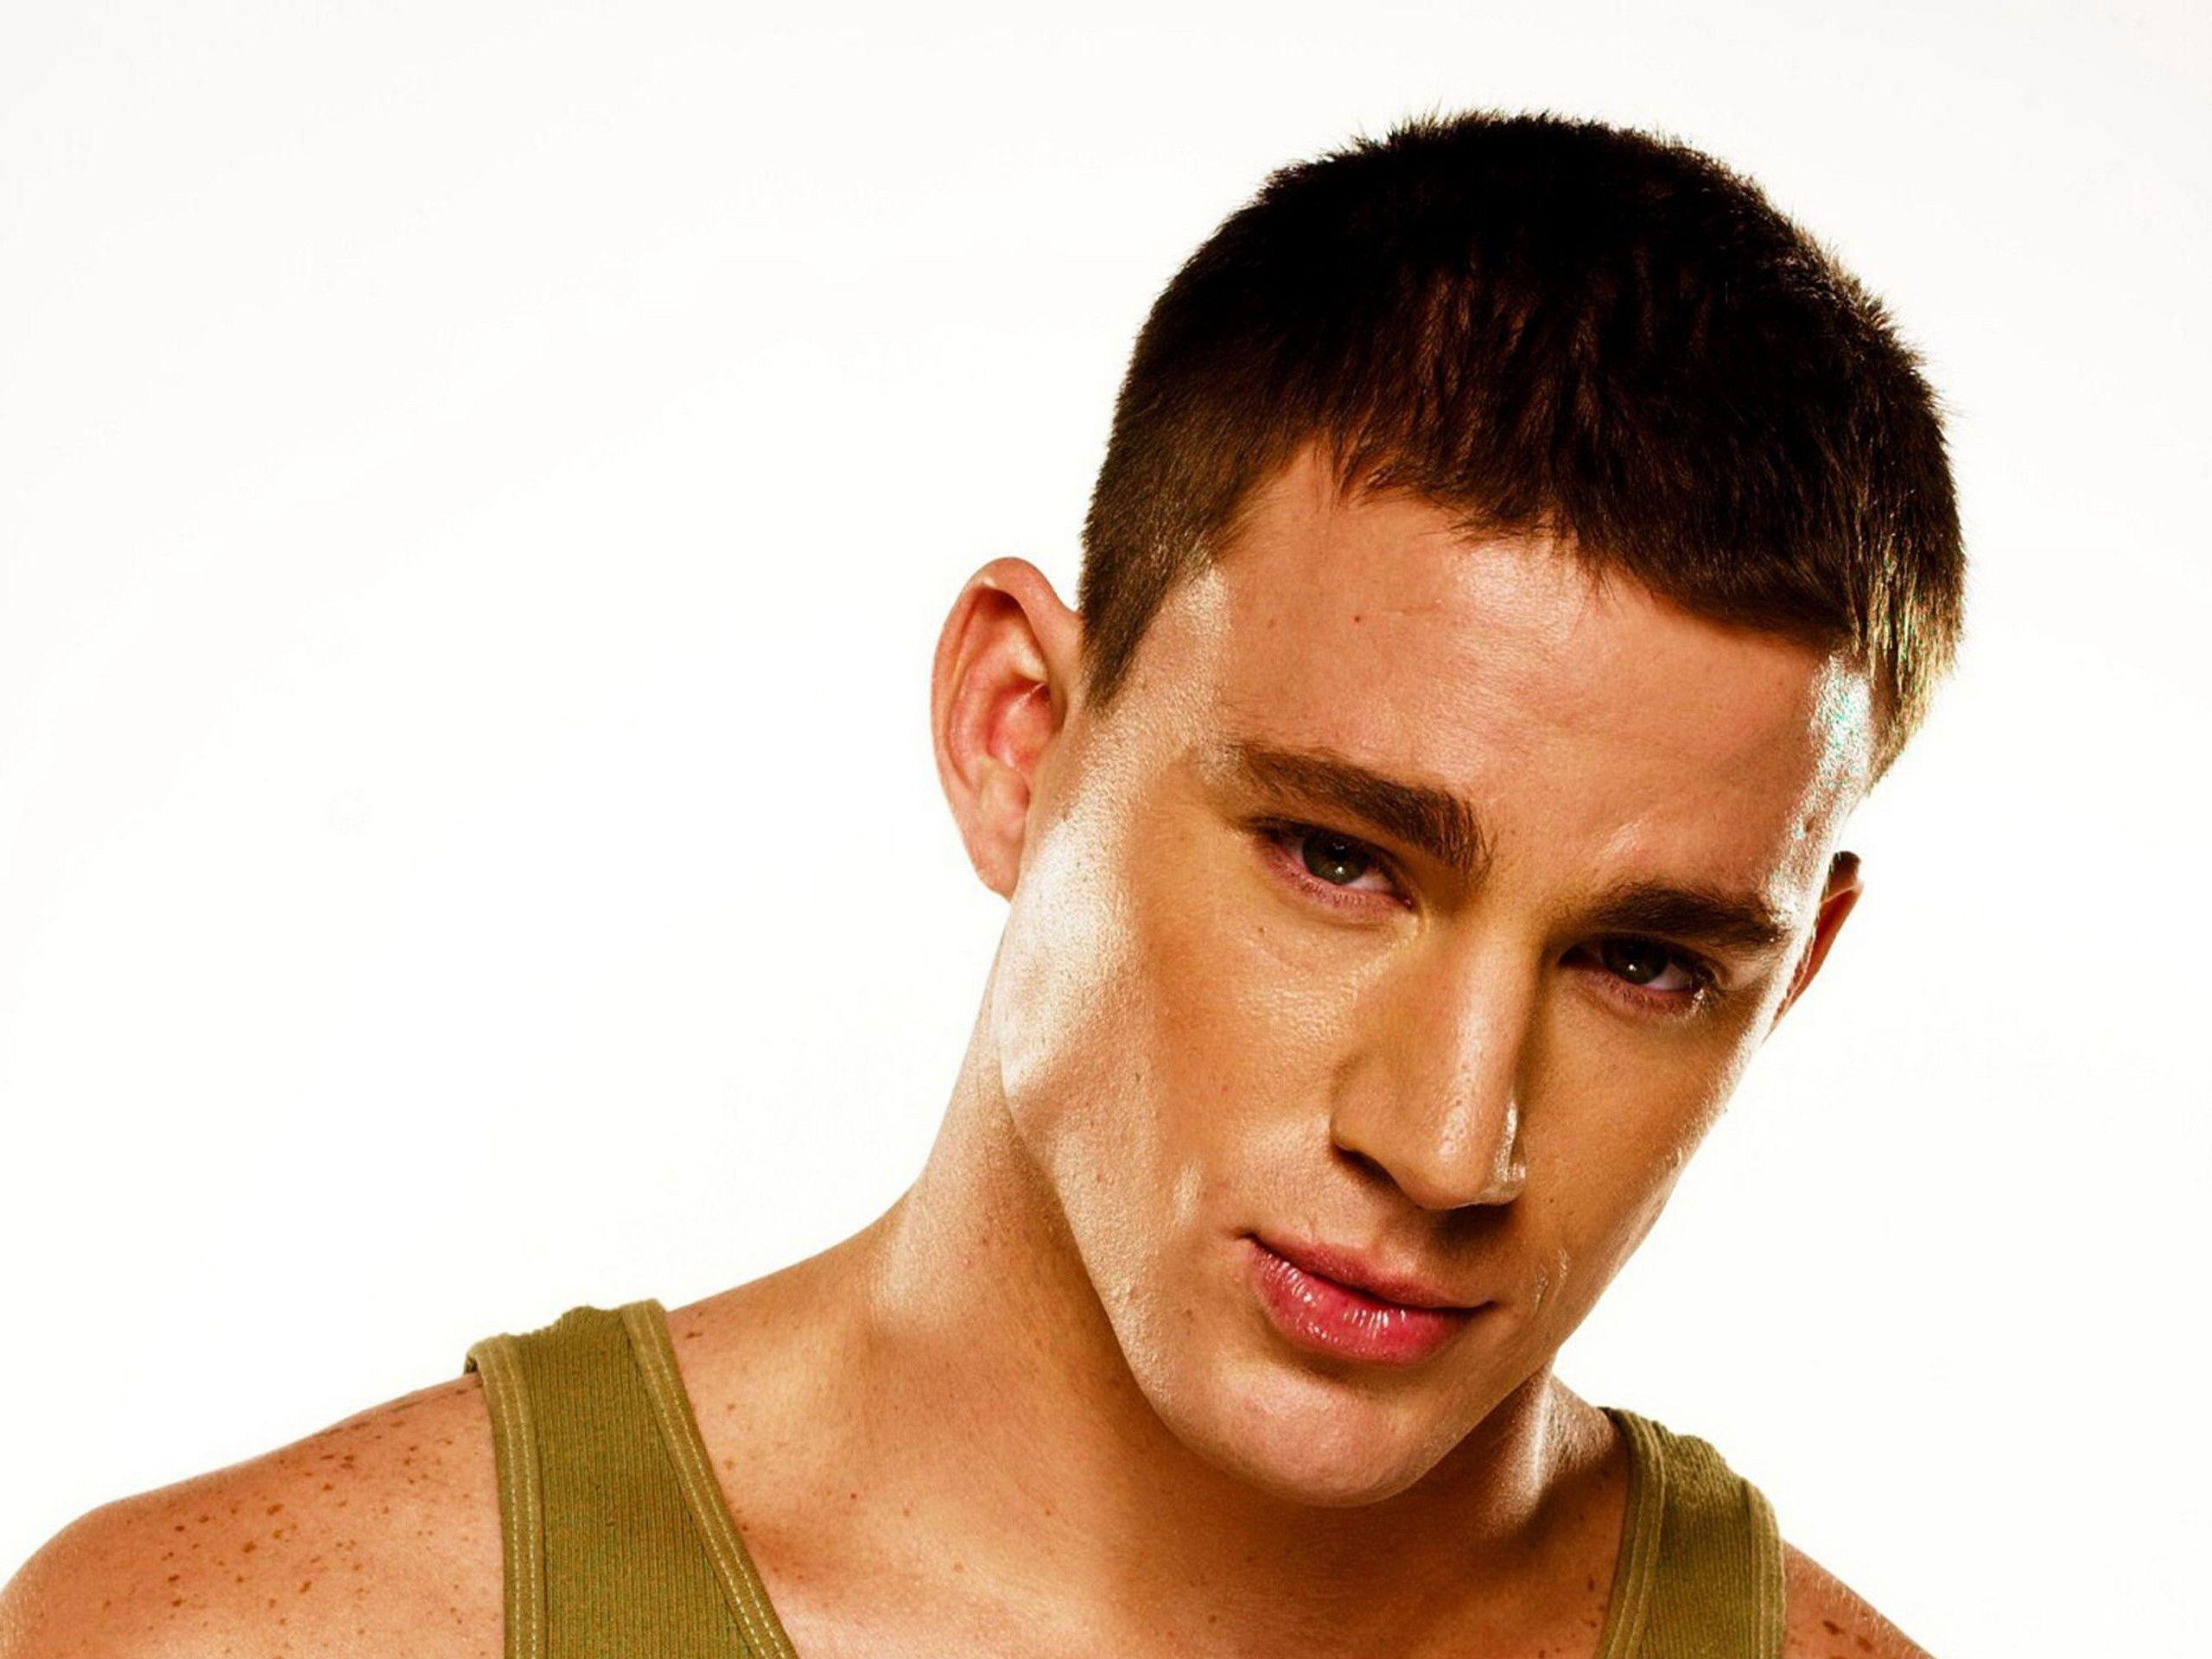 Channing Tatum: Was cast as a dancer in Ricky Martin's "She Bangs" music video. 2560x1920 HD Wallpaper.